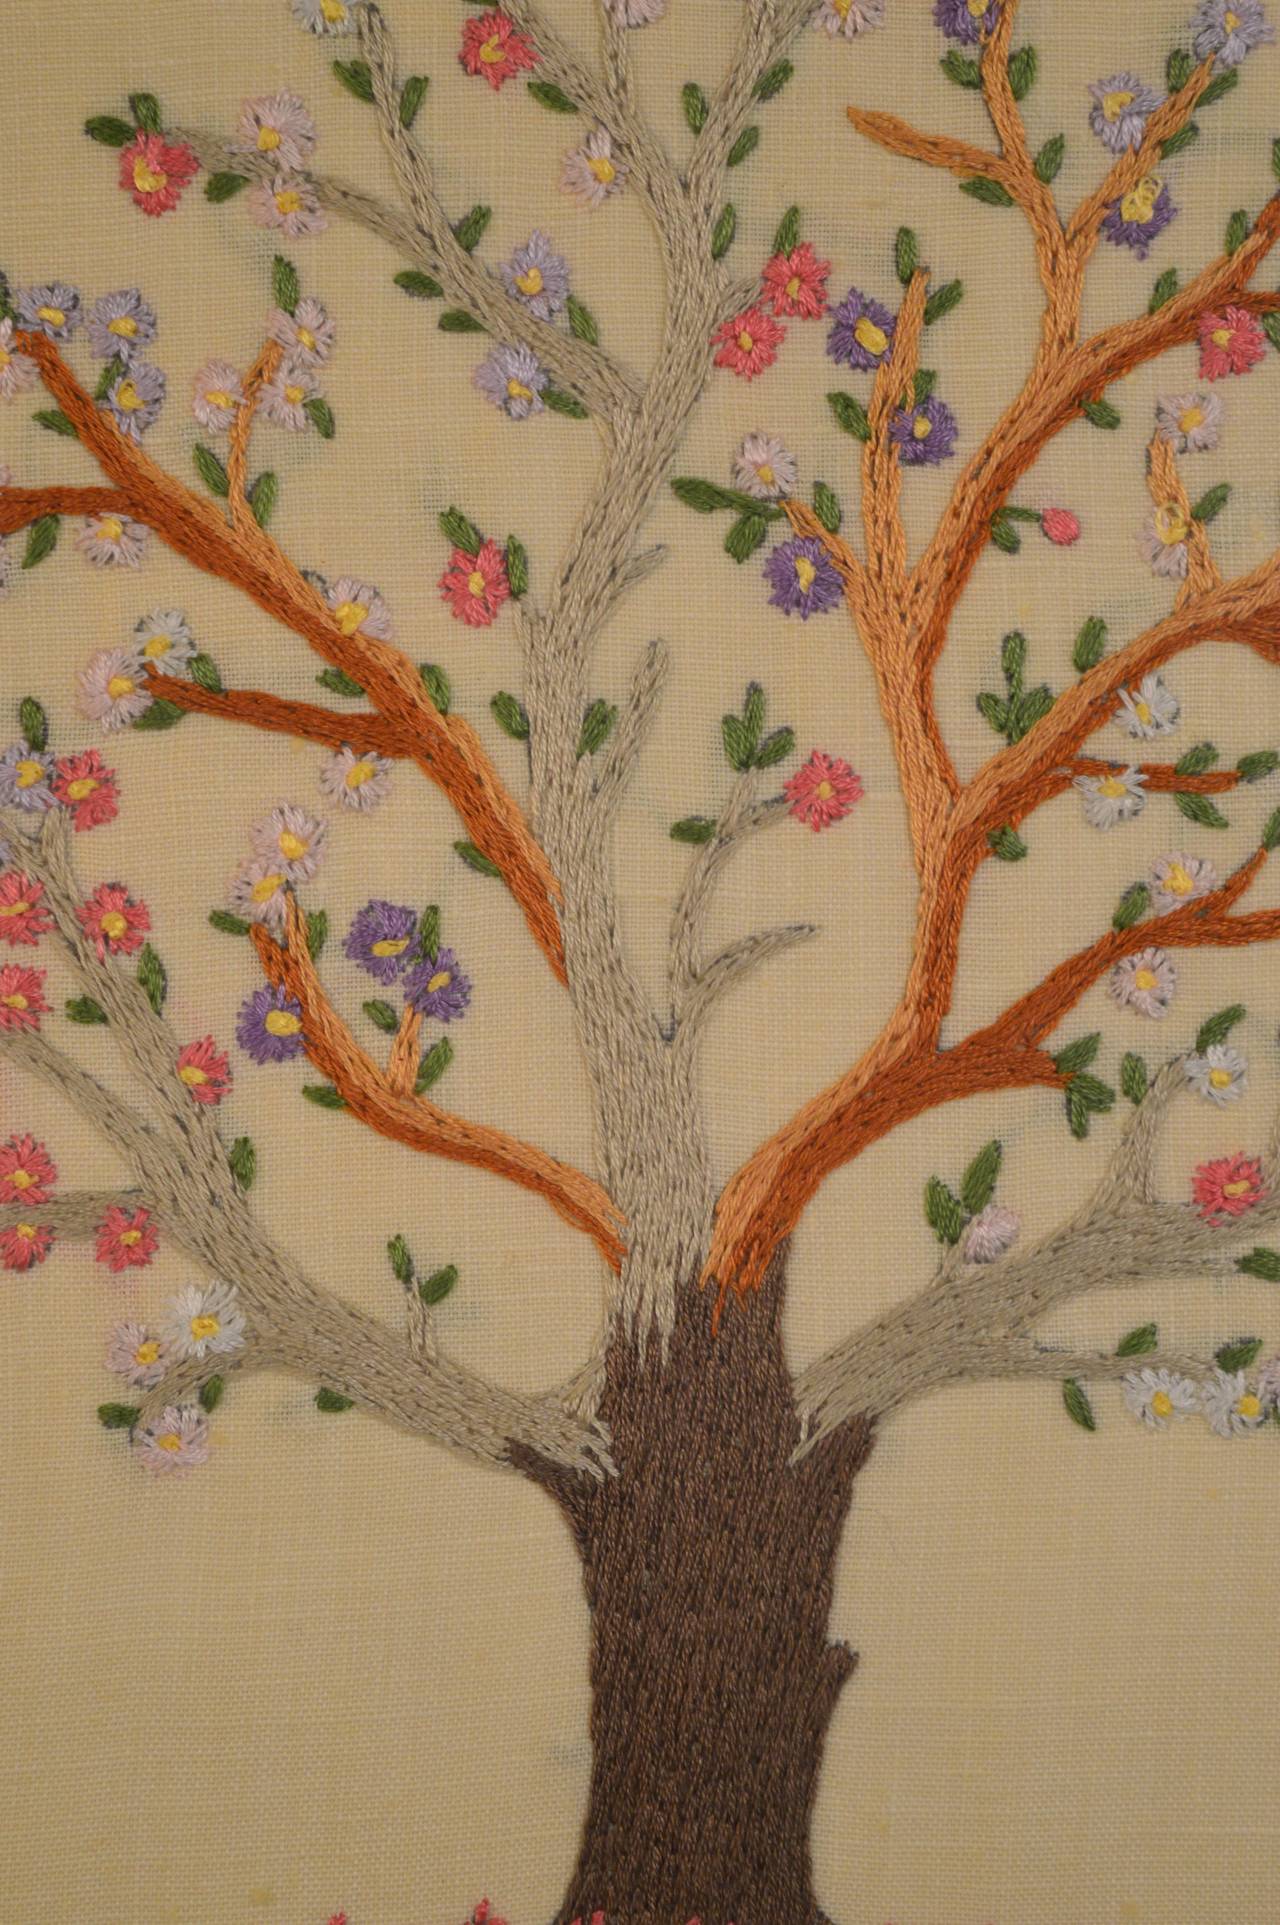 Hand Embroidered Belgian Panels Depicting the Four Seasons, circa 1940 3